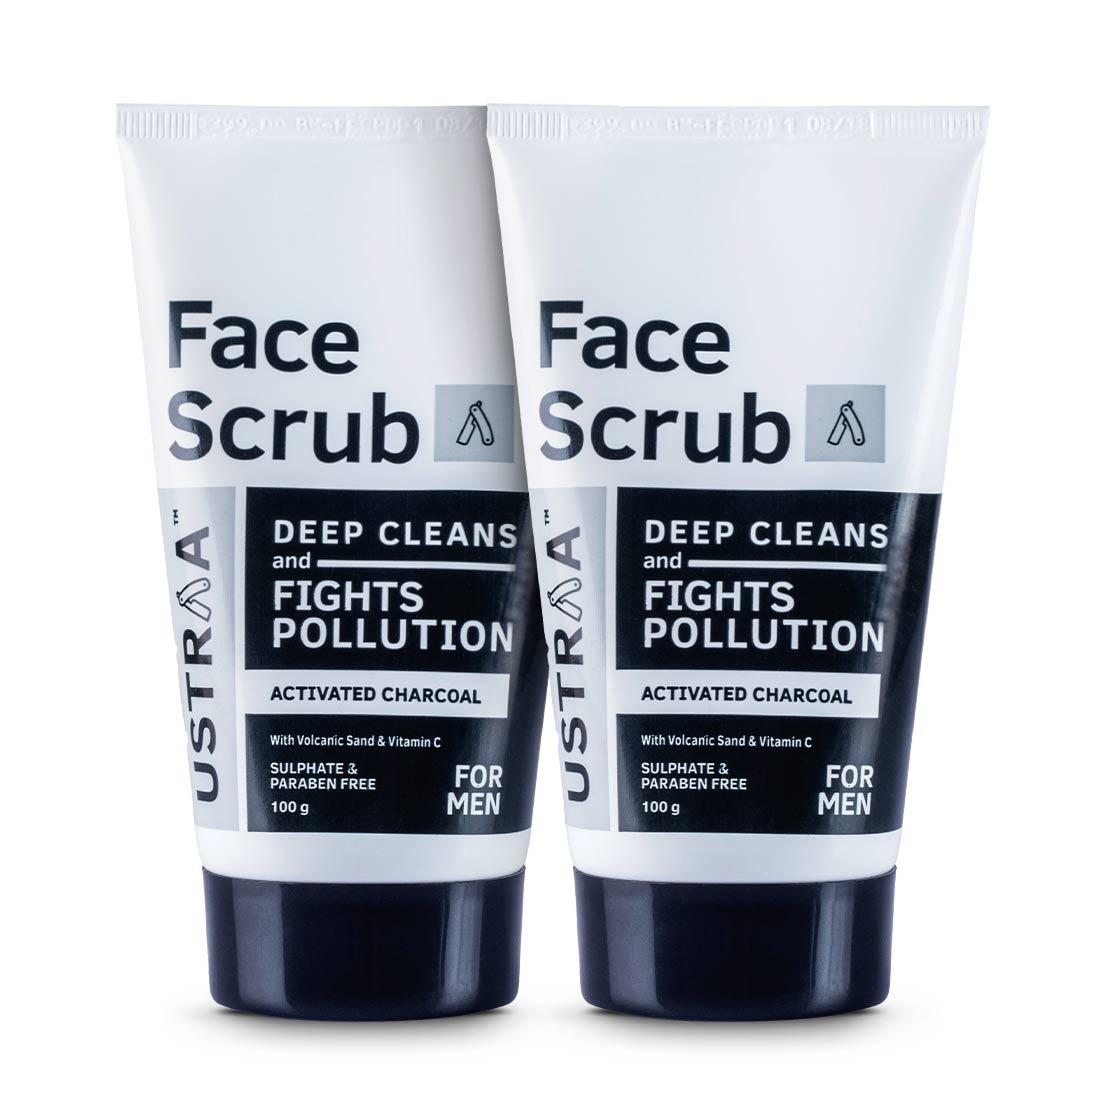 Activated Charcoal Face Scrub - 100g (Set of 2)